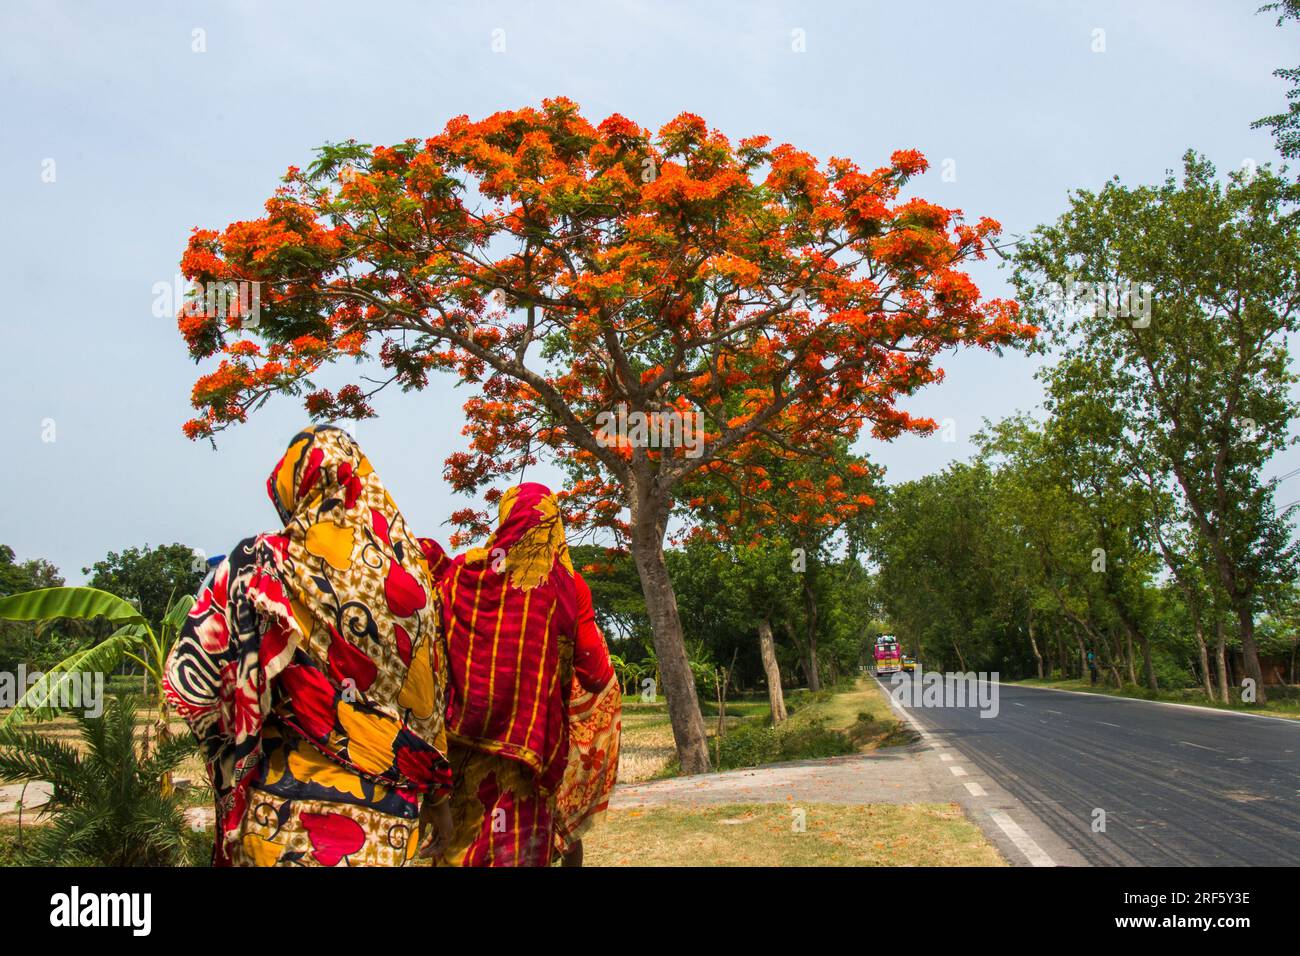 Two women in similar colorful cloth, walking towards a royal poinciana tree Stock Photo